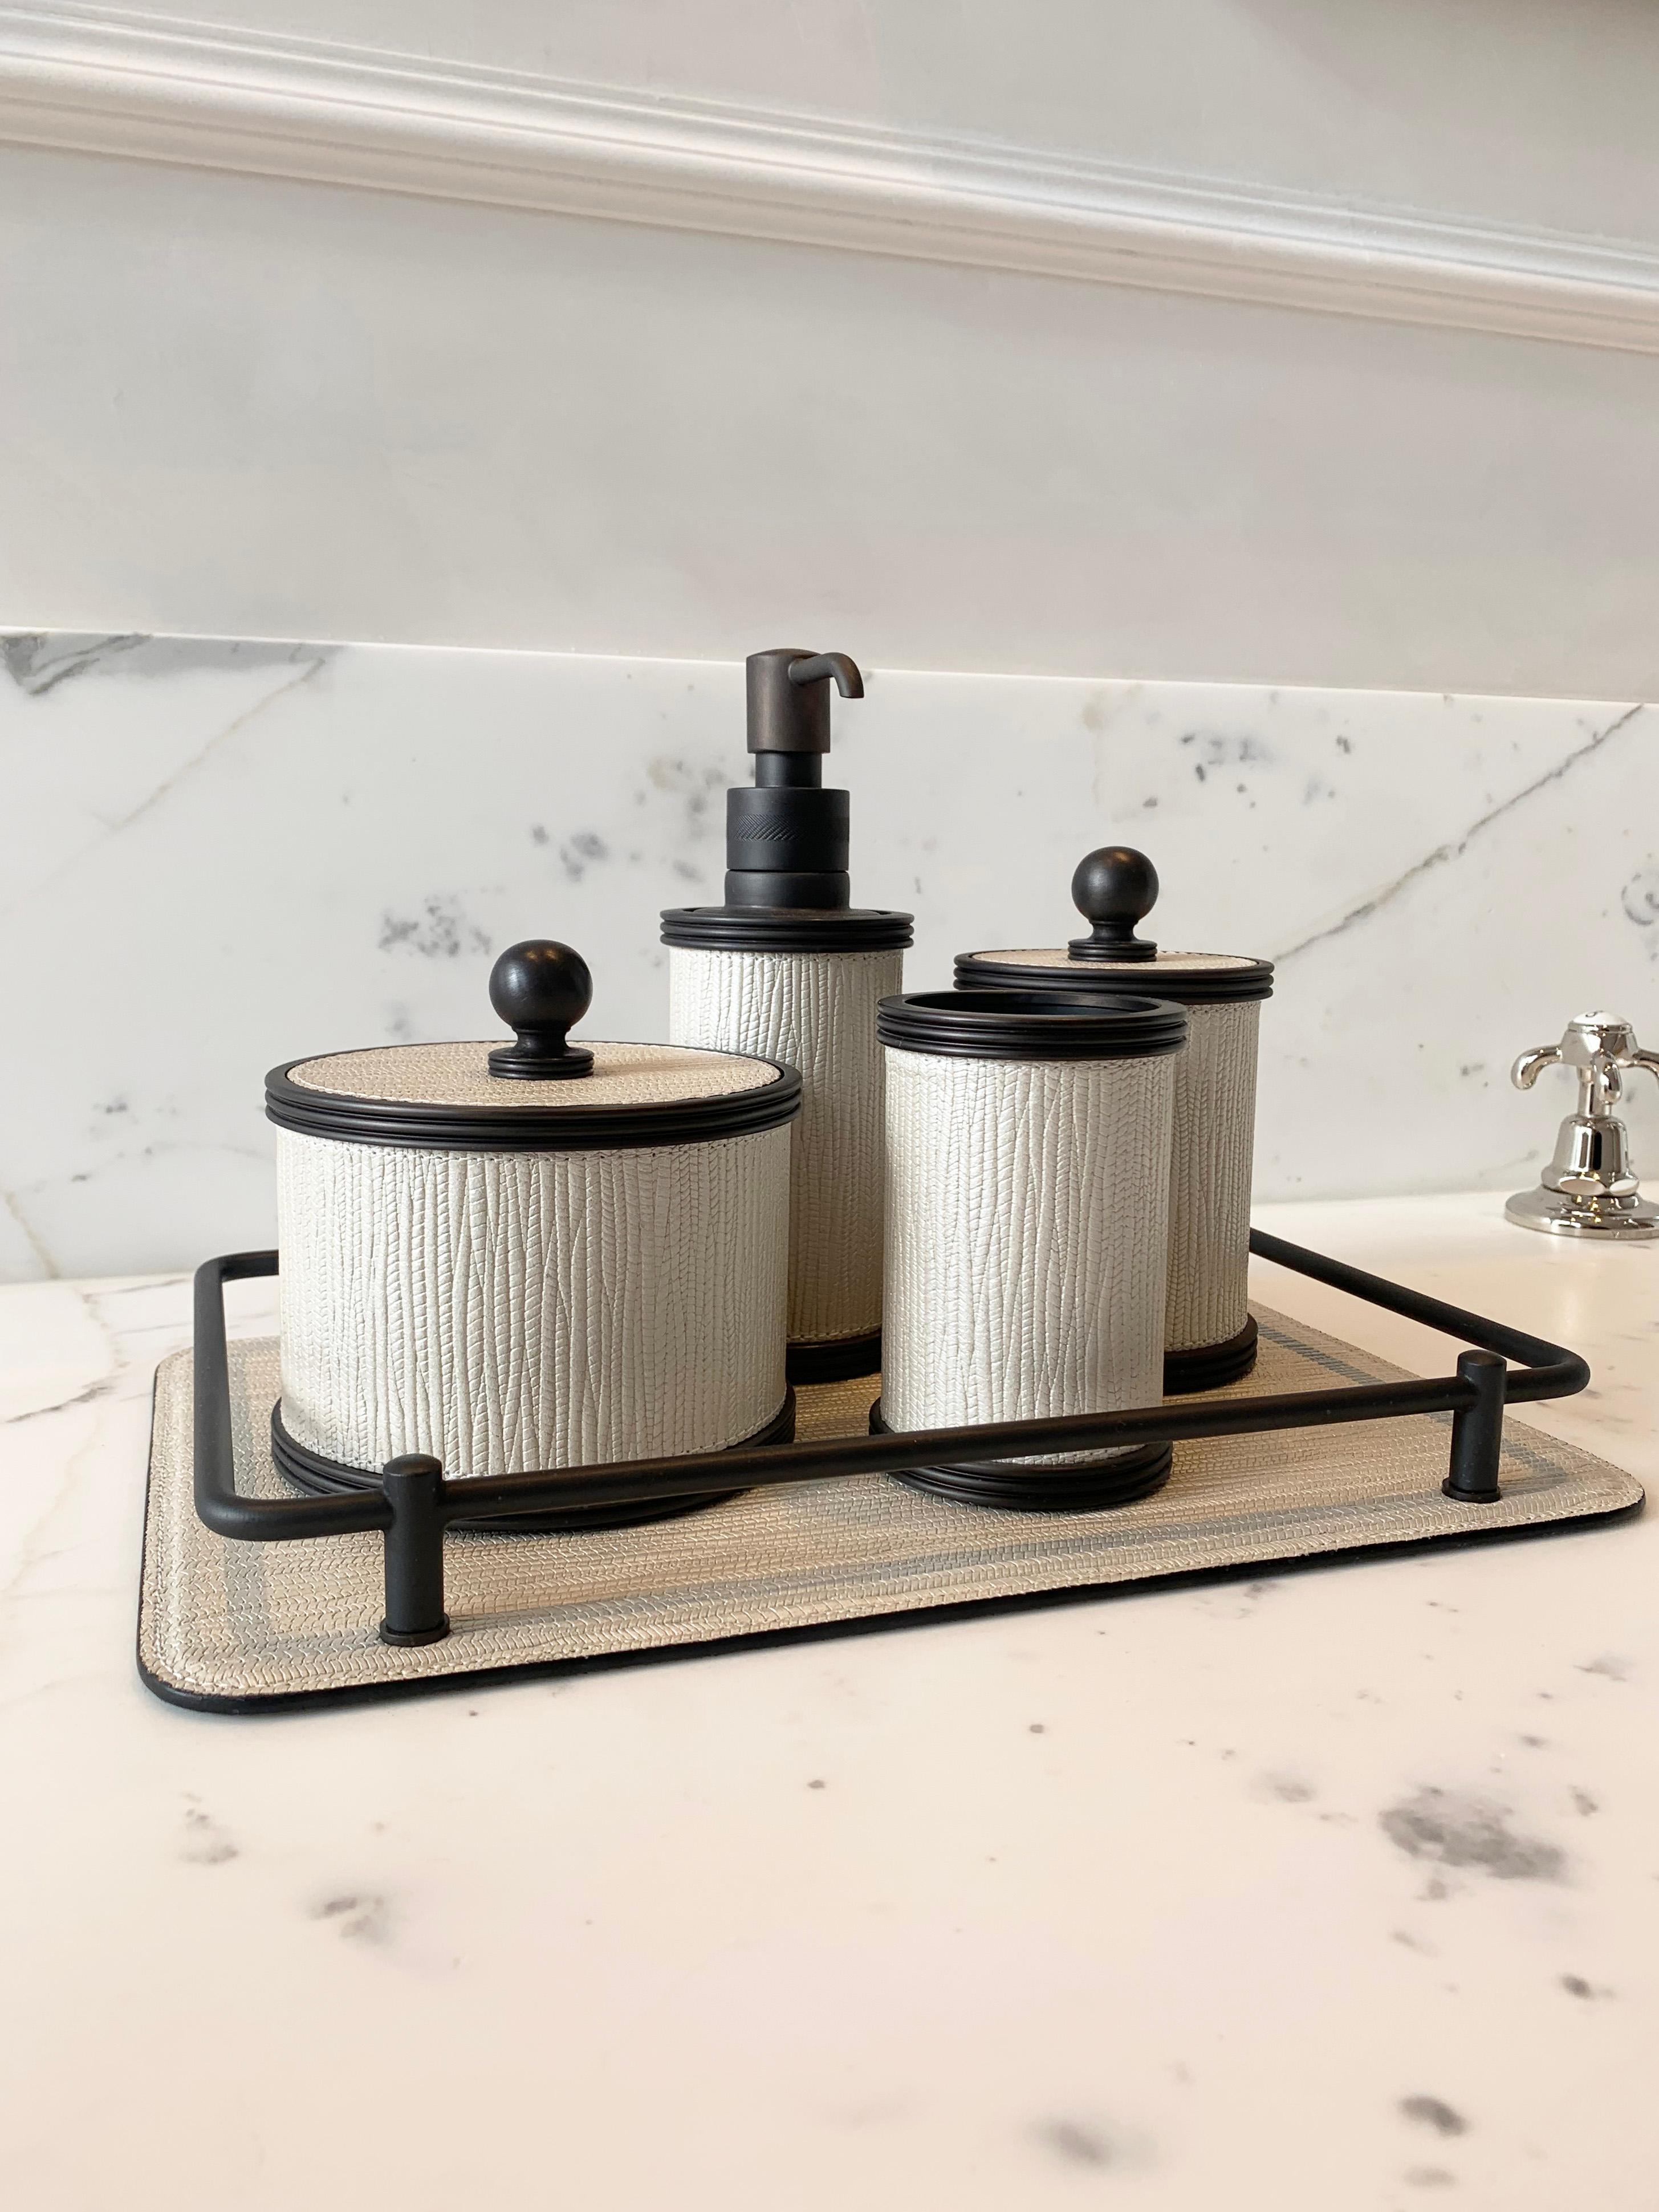 Amalfi bathroom set by Giobagnara. In leather, brass, and bronze.

This luxurious bathroom set is made up of a soap dispenser, toothbrush holder, two lidded dishes; in two different sizes, tray, an oblong tissue box cover, and bath bin.

All